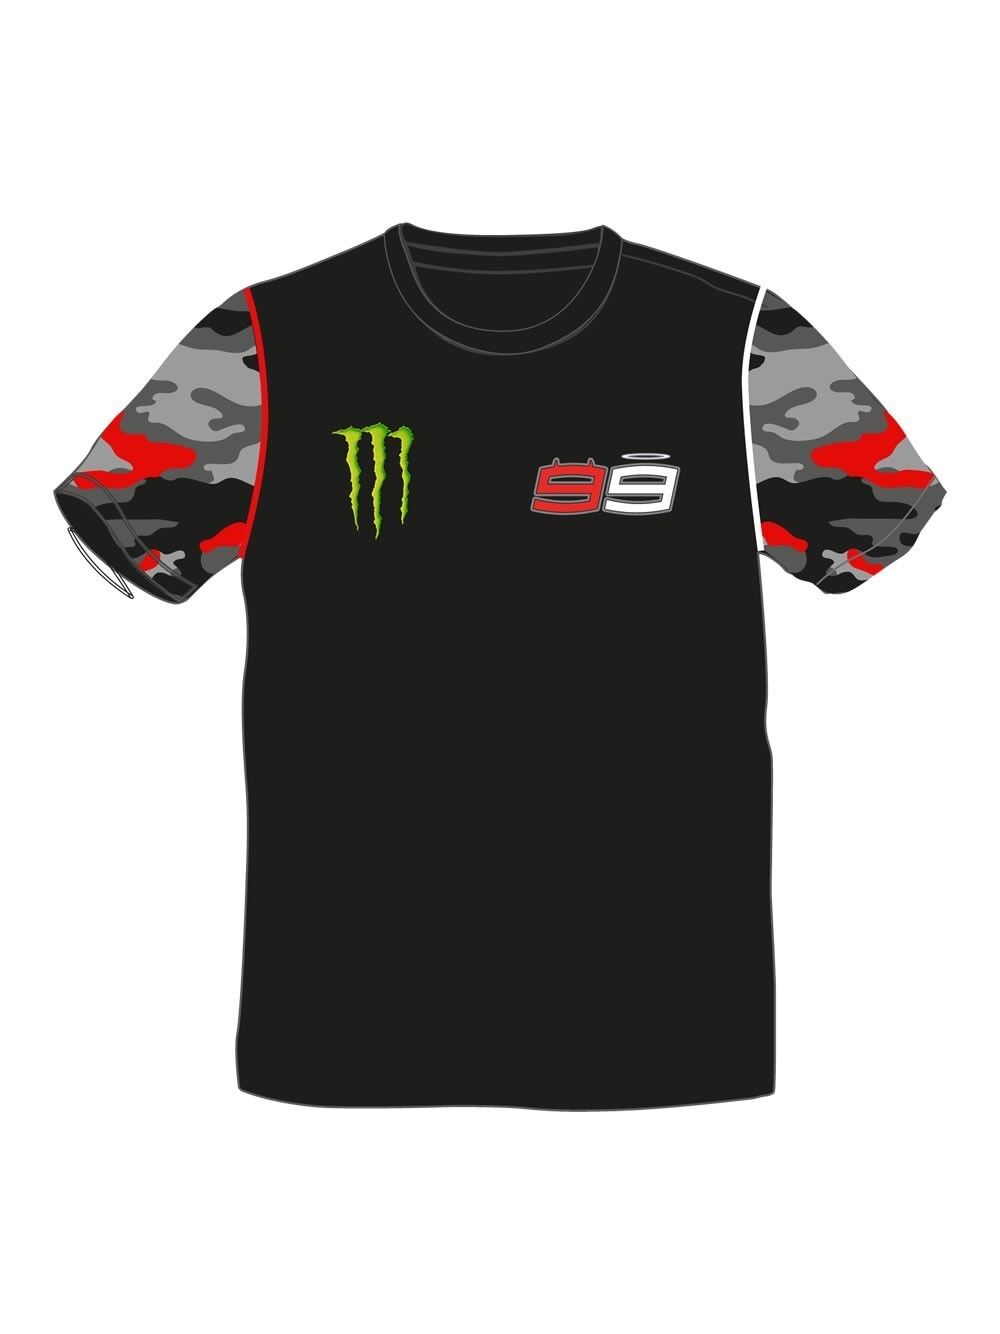 New Official Jorge Lorezno Monster T Shirt - 16 31401